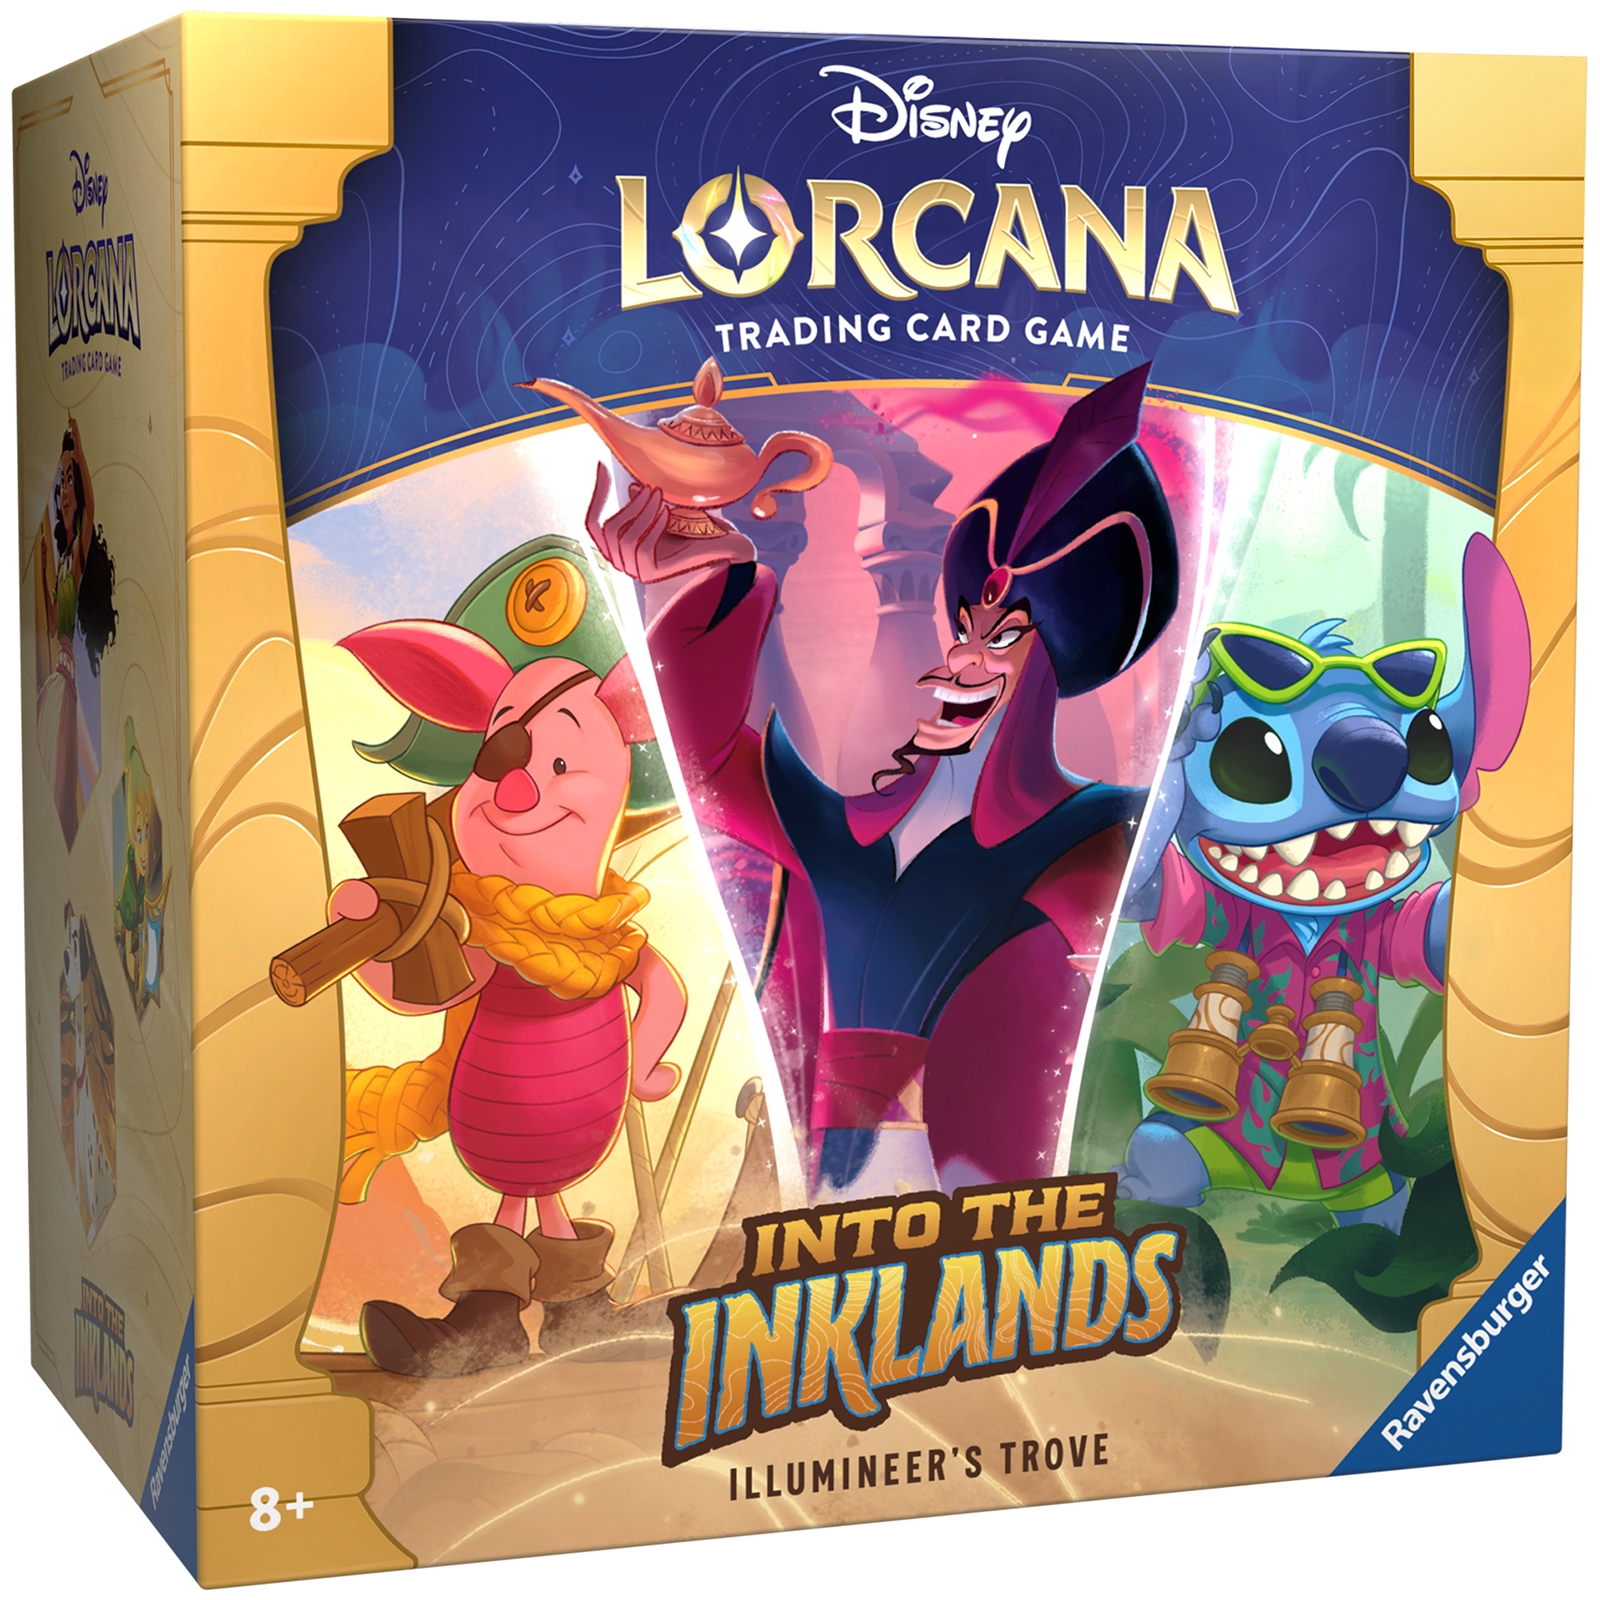 Disney Lorcana Trading Card Games Into the Inklands Ilumuneer's Trove